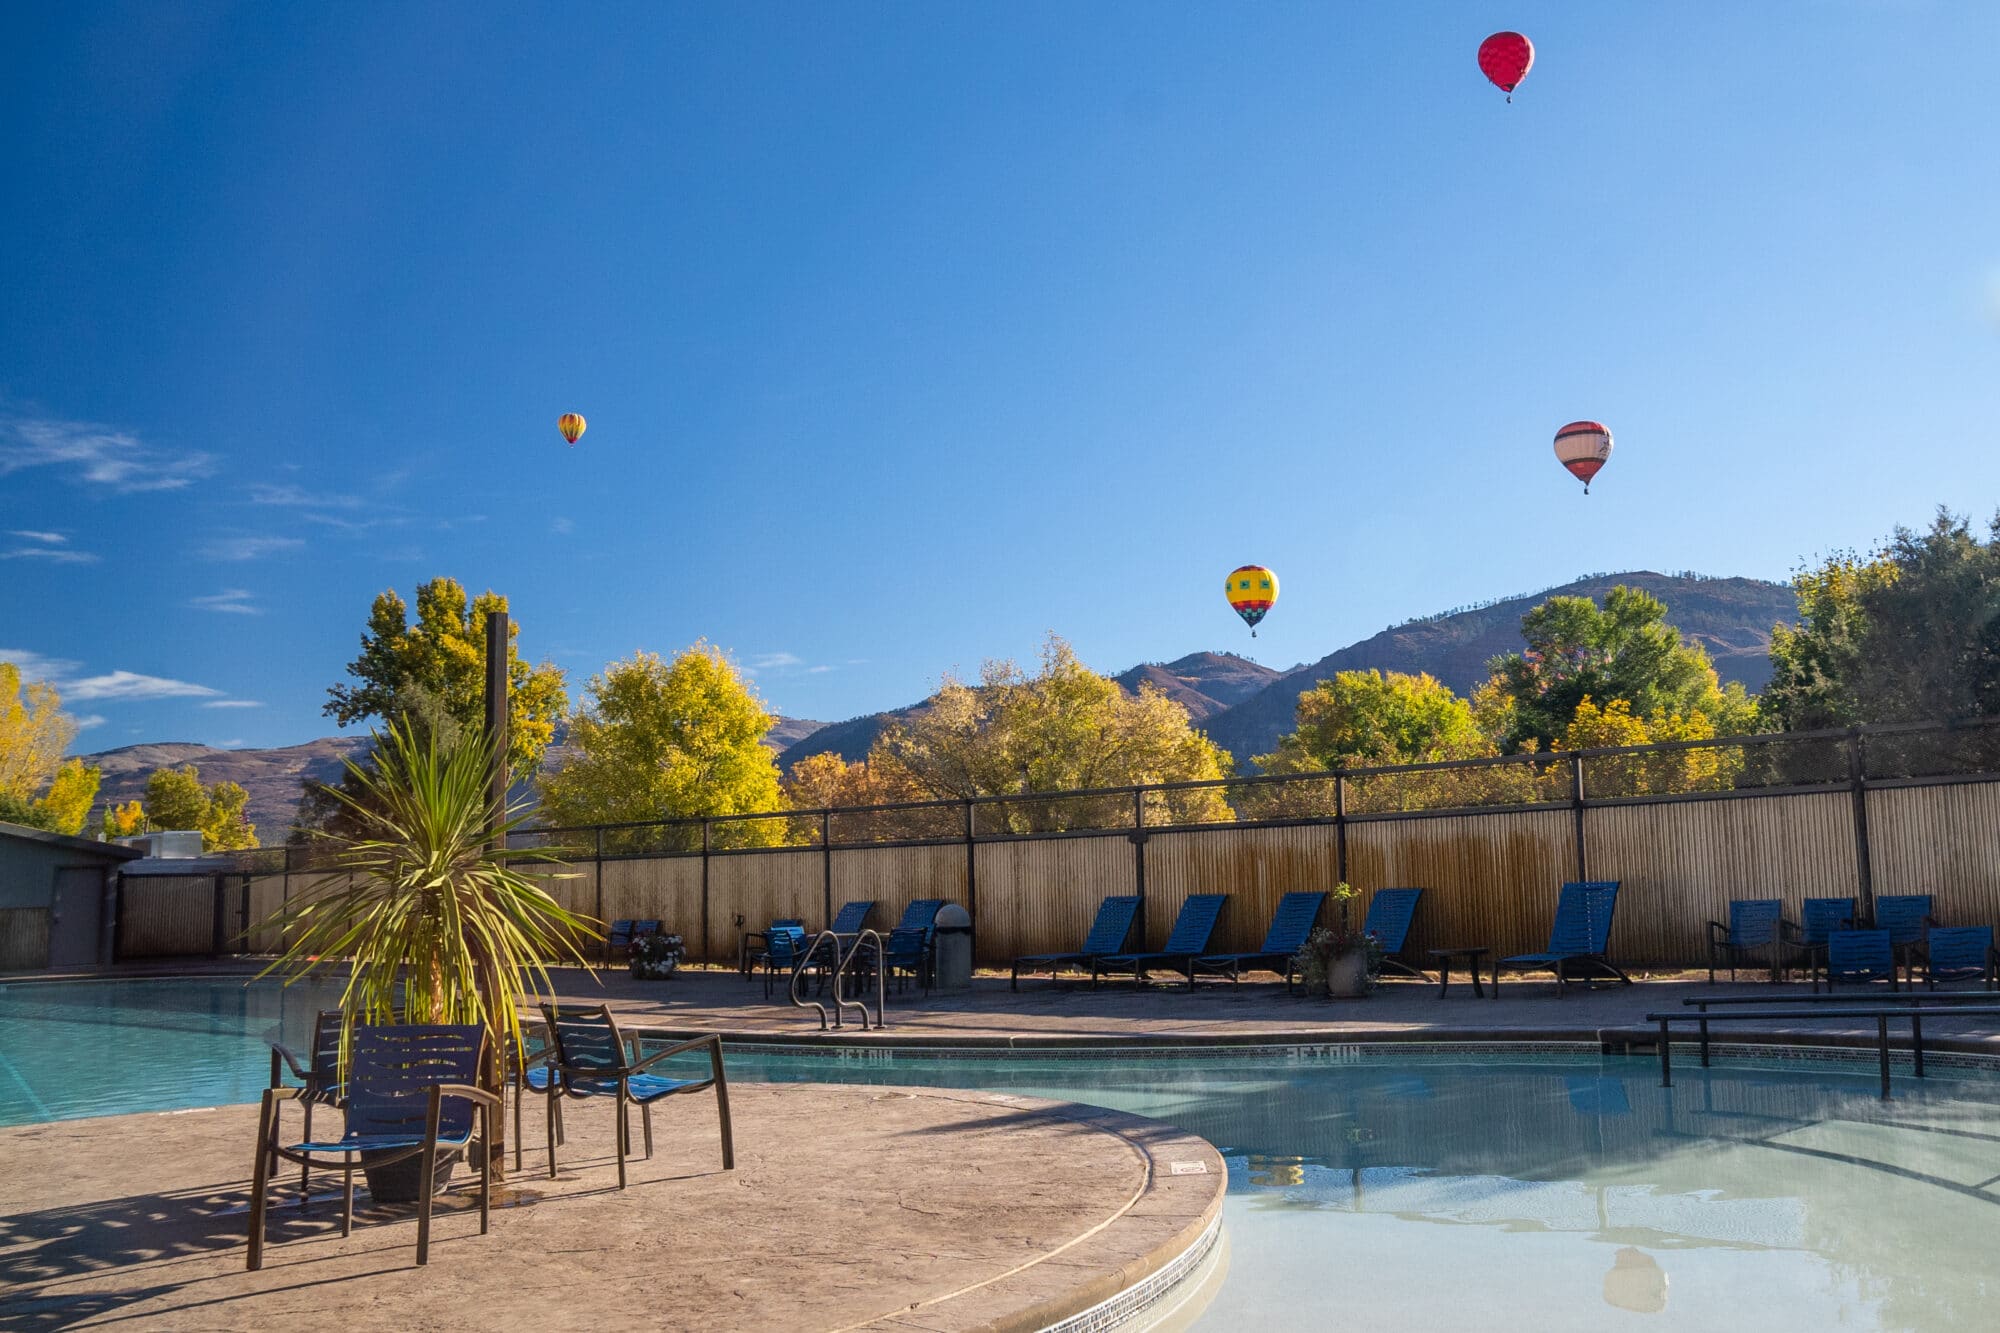 Hot air balloons rise in the distance as viewed from the pools at Durango Hot Springs Resort